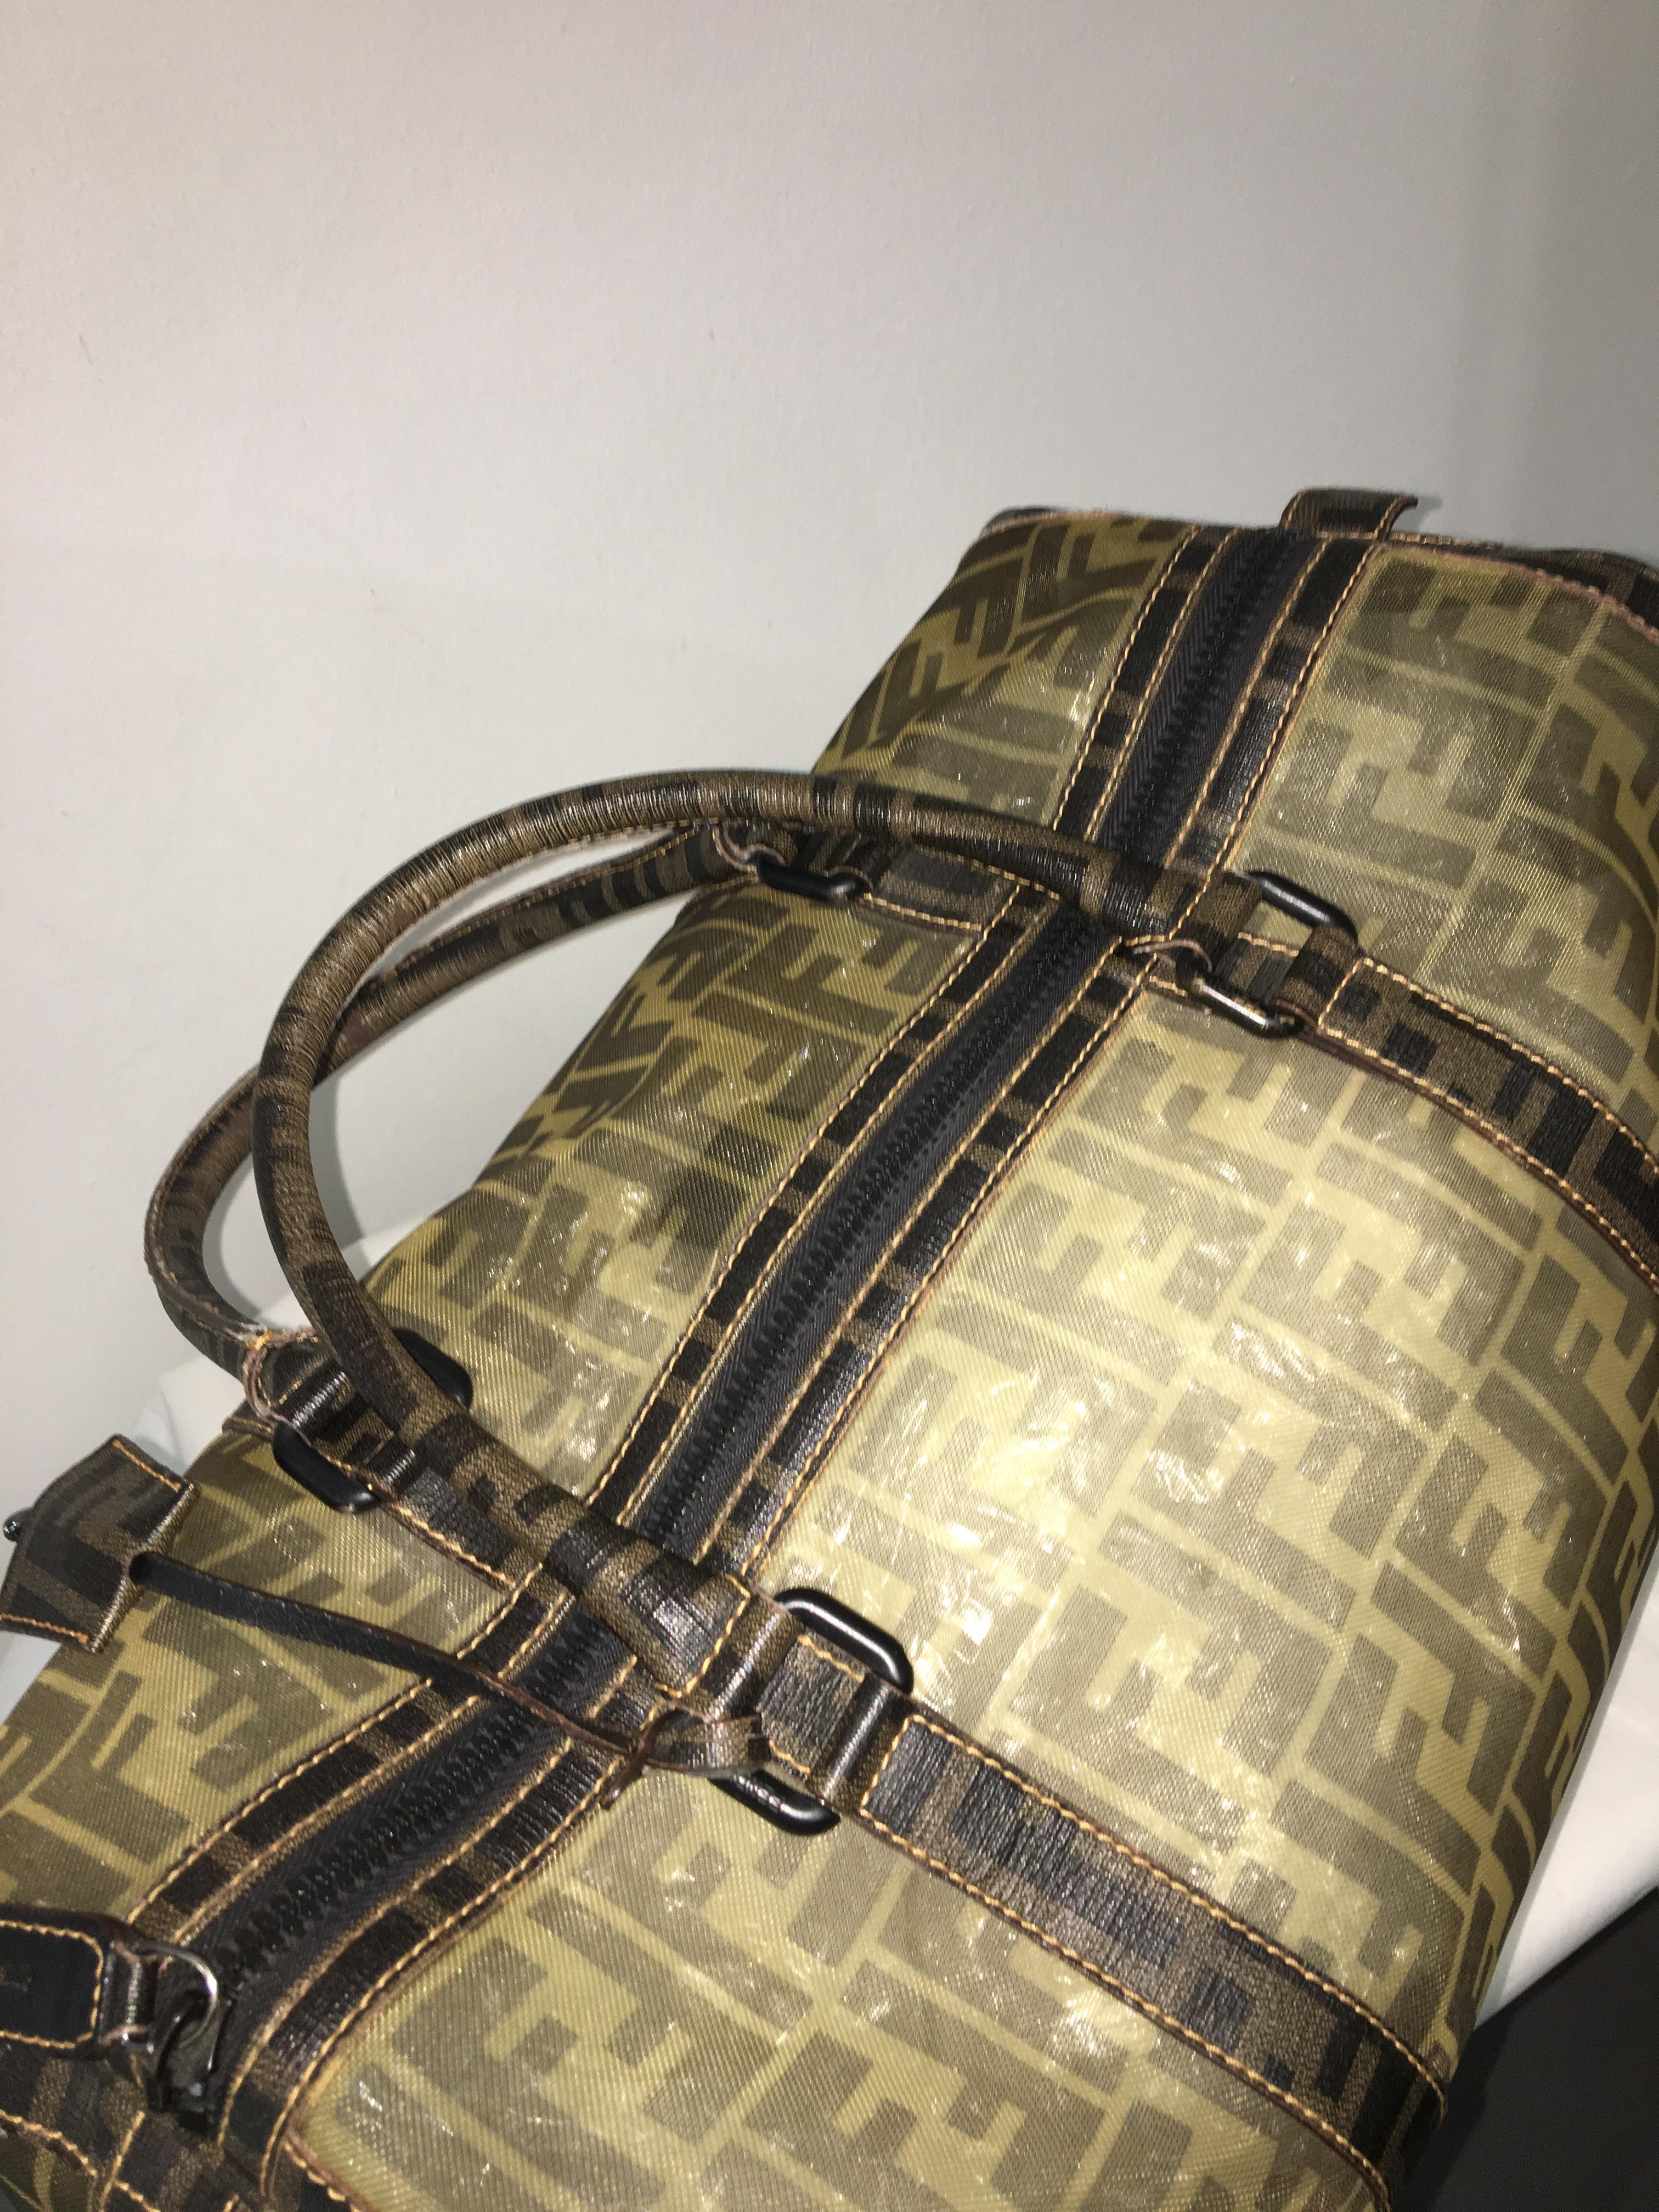 Authentic large-sized Fendi Boston bag.
The Fendi Bag is made from very tight mesh that makes the bag relatively transparent.
The bag is in good condition with minor signs of wear.
Measurements: 40 x 24 x 20.